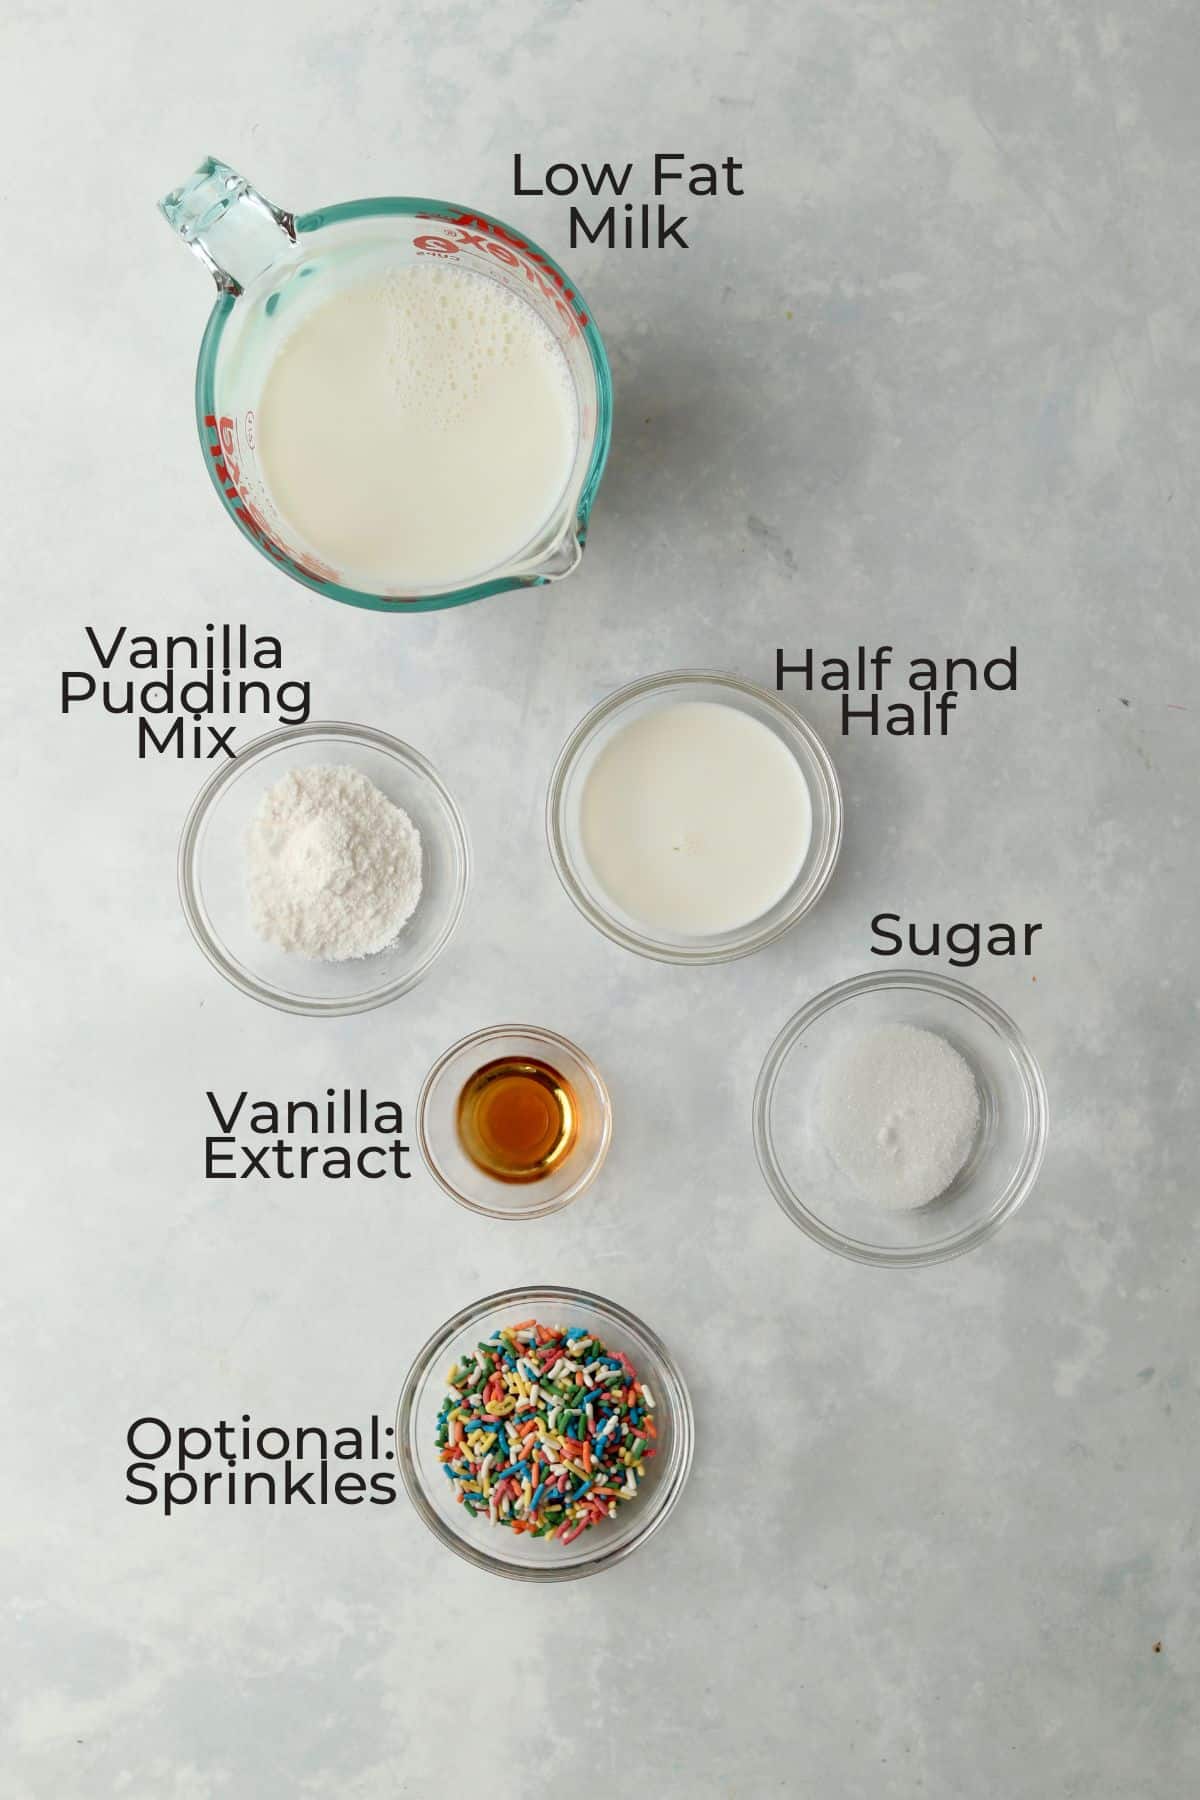 low fat milk, half and half, pudding mix, vanilla extract, sugar, and sprinkles in small bowls